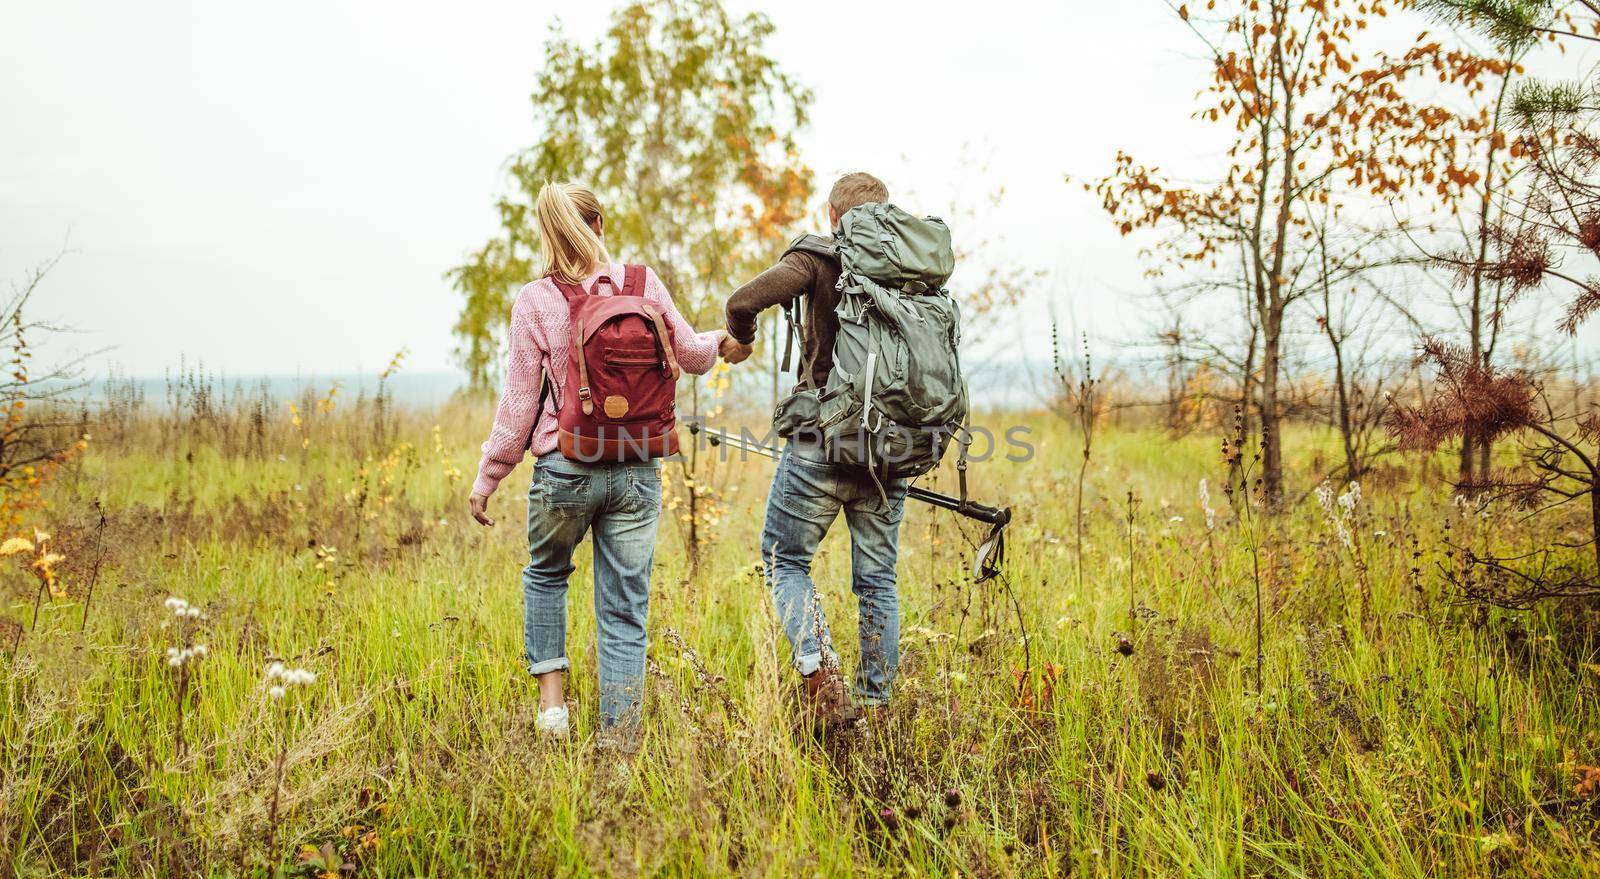 Rear view of a traveling couple of backpacker wading outdoors through an autumn field holding hands with hiking poles. Hiking concept by LipikStockMedia